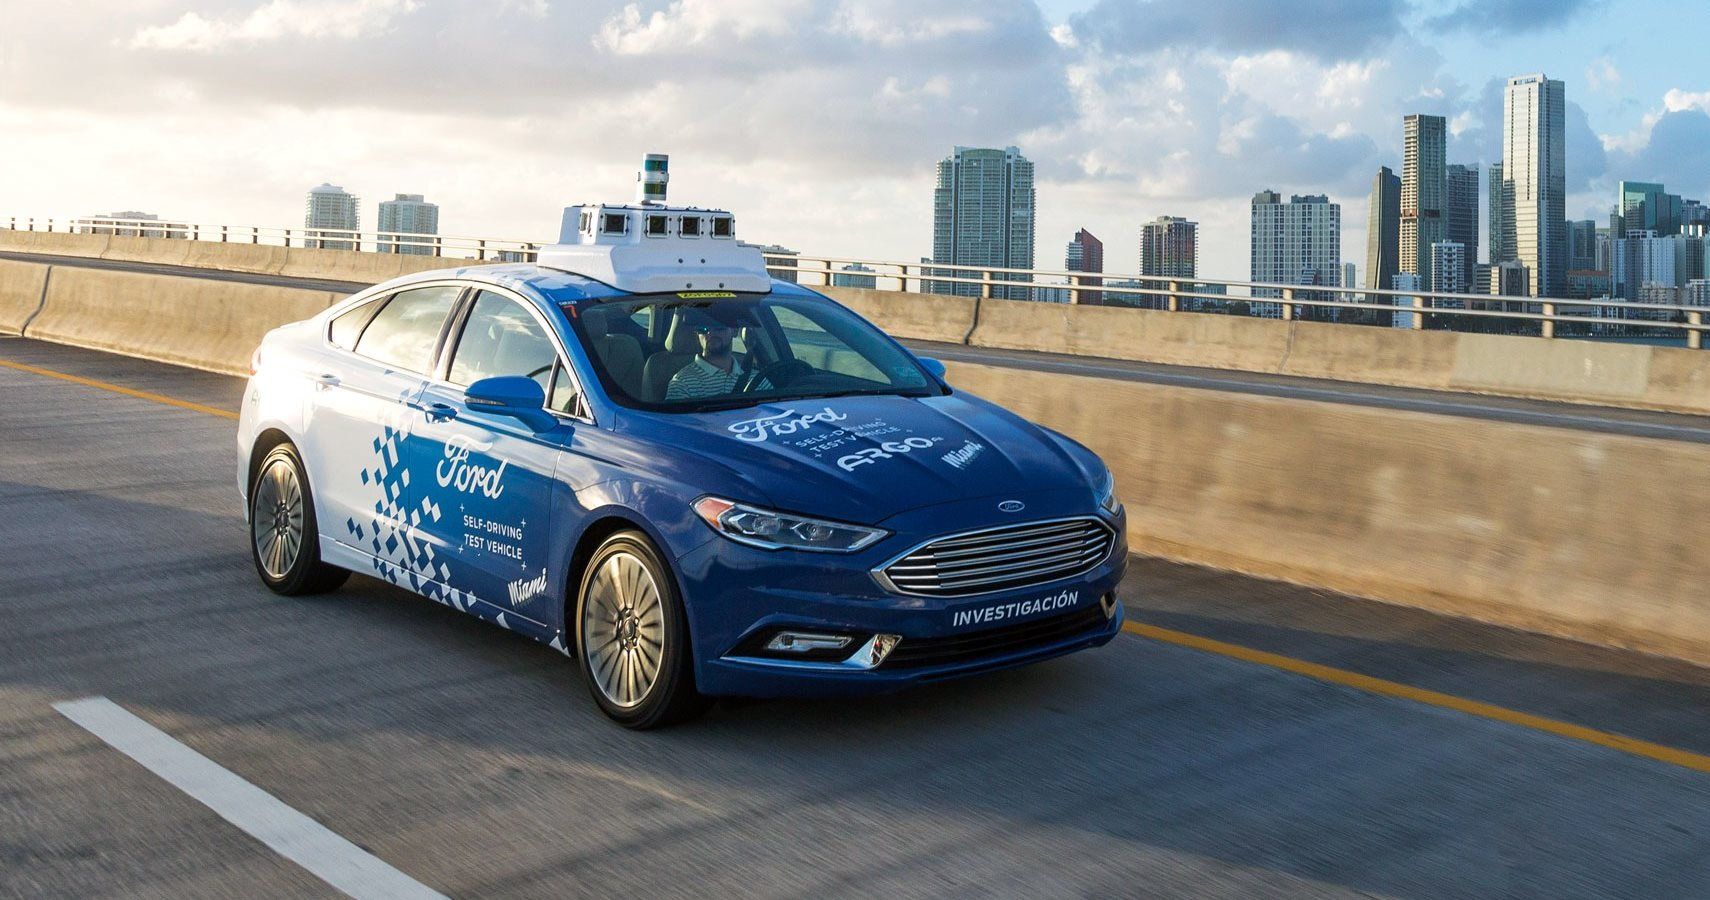 Toyota, Ford, And GM Collaborating To Make Autonomous Vehicle Standards